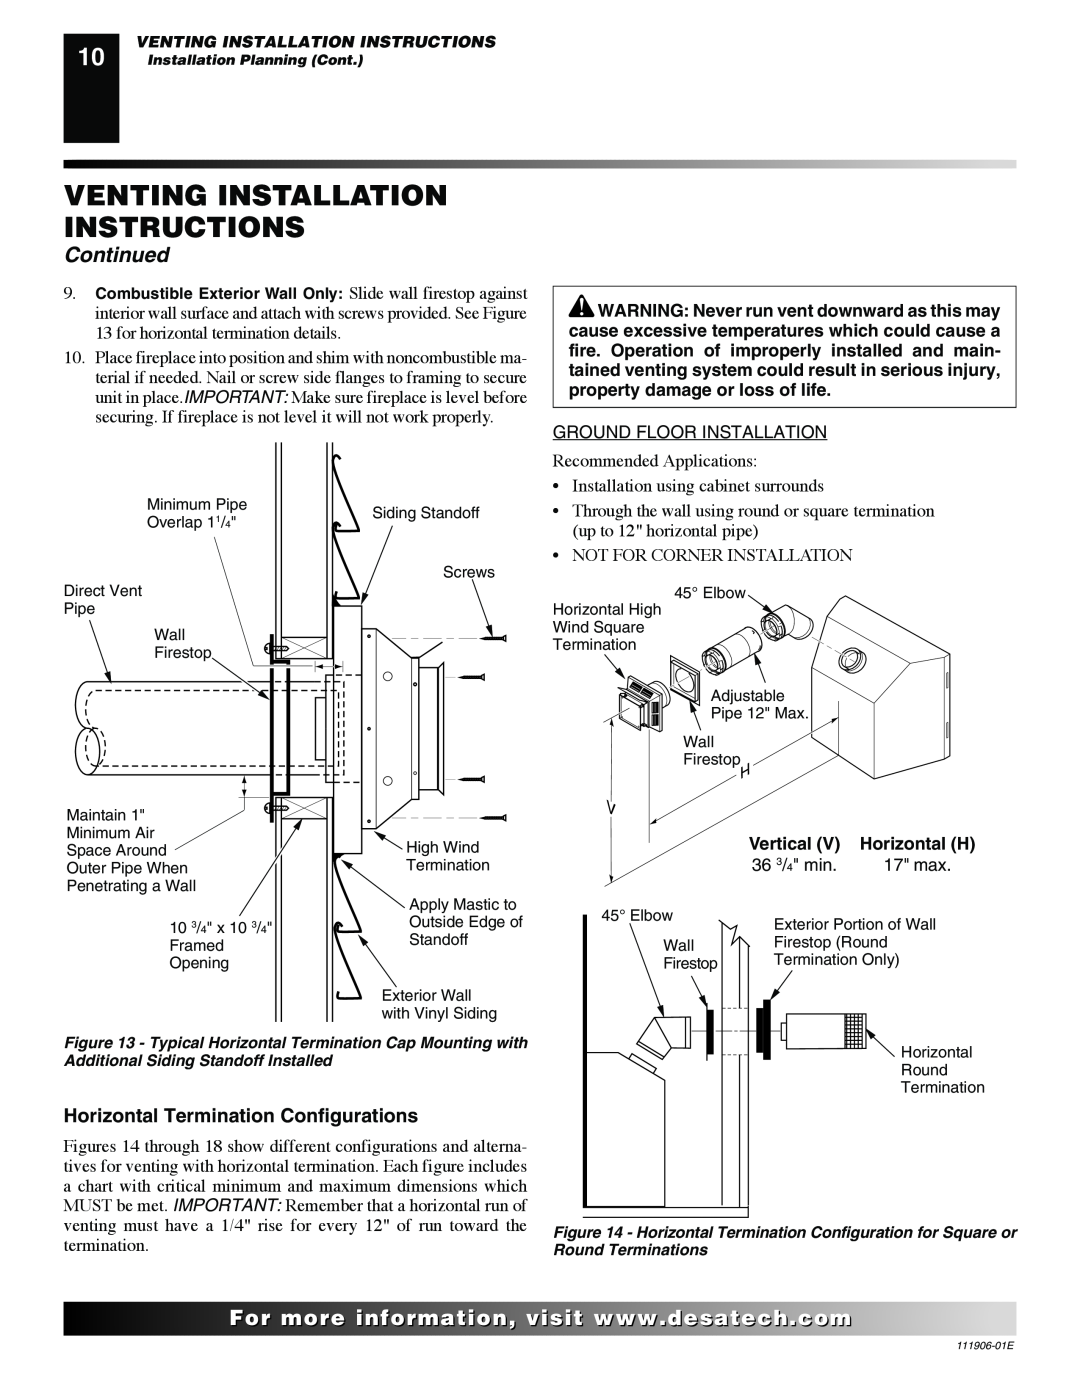 Desa CHDV42NR-B, V42P-A, V42N-A, VV42NB(1), VV42PB(1) Venting Installation Instructions, Continued, For..com, Vertical 